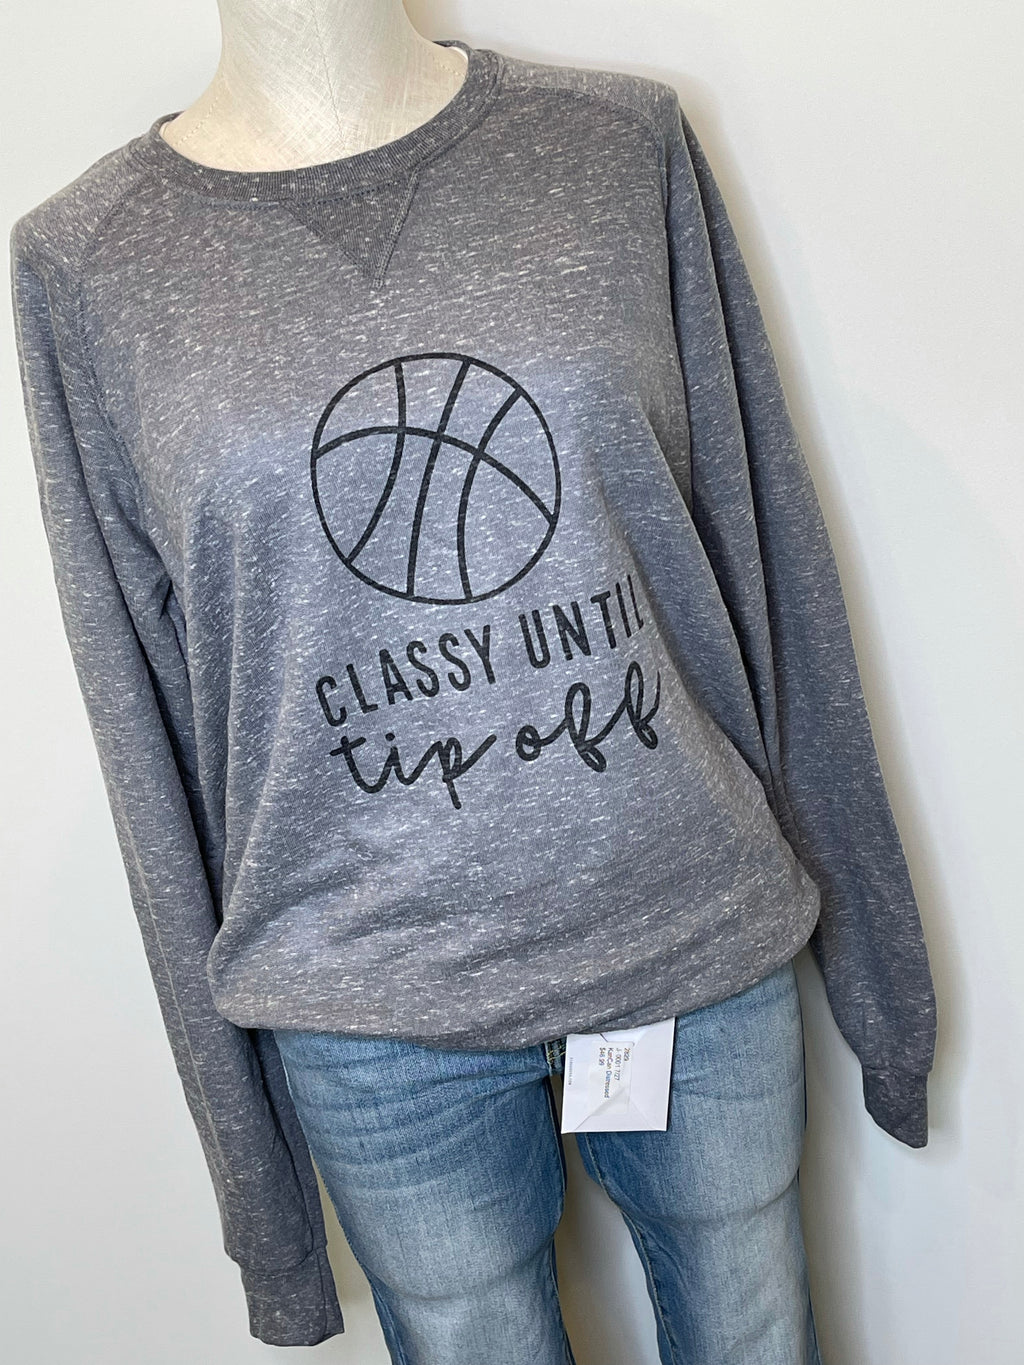 Classy Until Tip off French Terry Sweatshirt